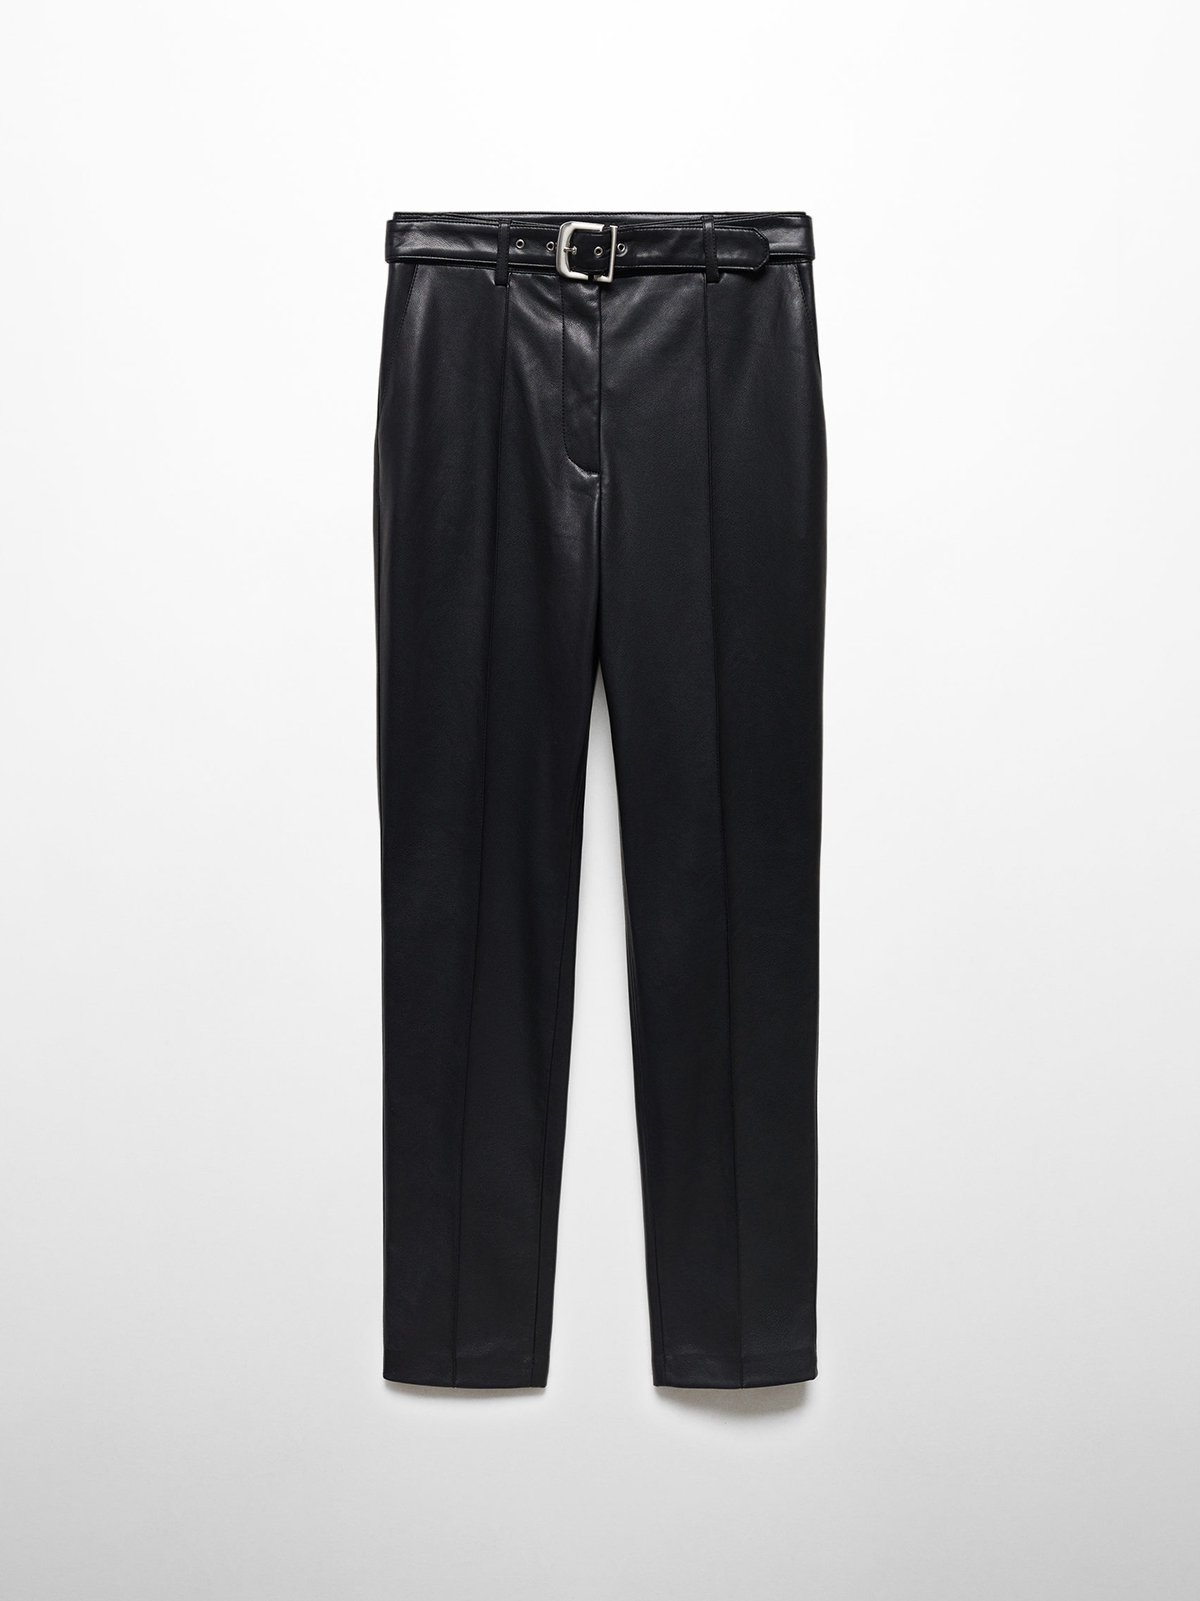 Brand New Mango Basics Black Work Office Trousers, Women's Fashion,  Bottoms, Other Bottoms on Carousell